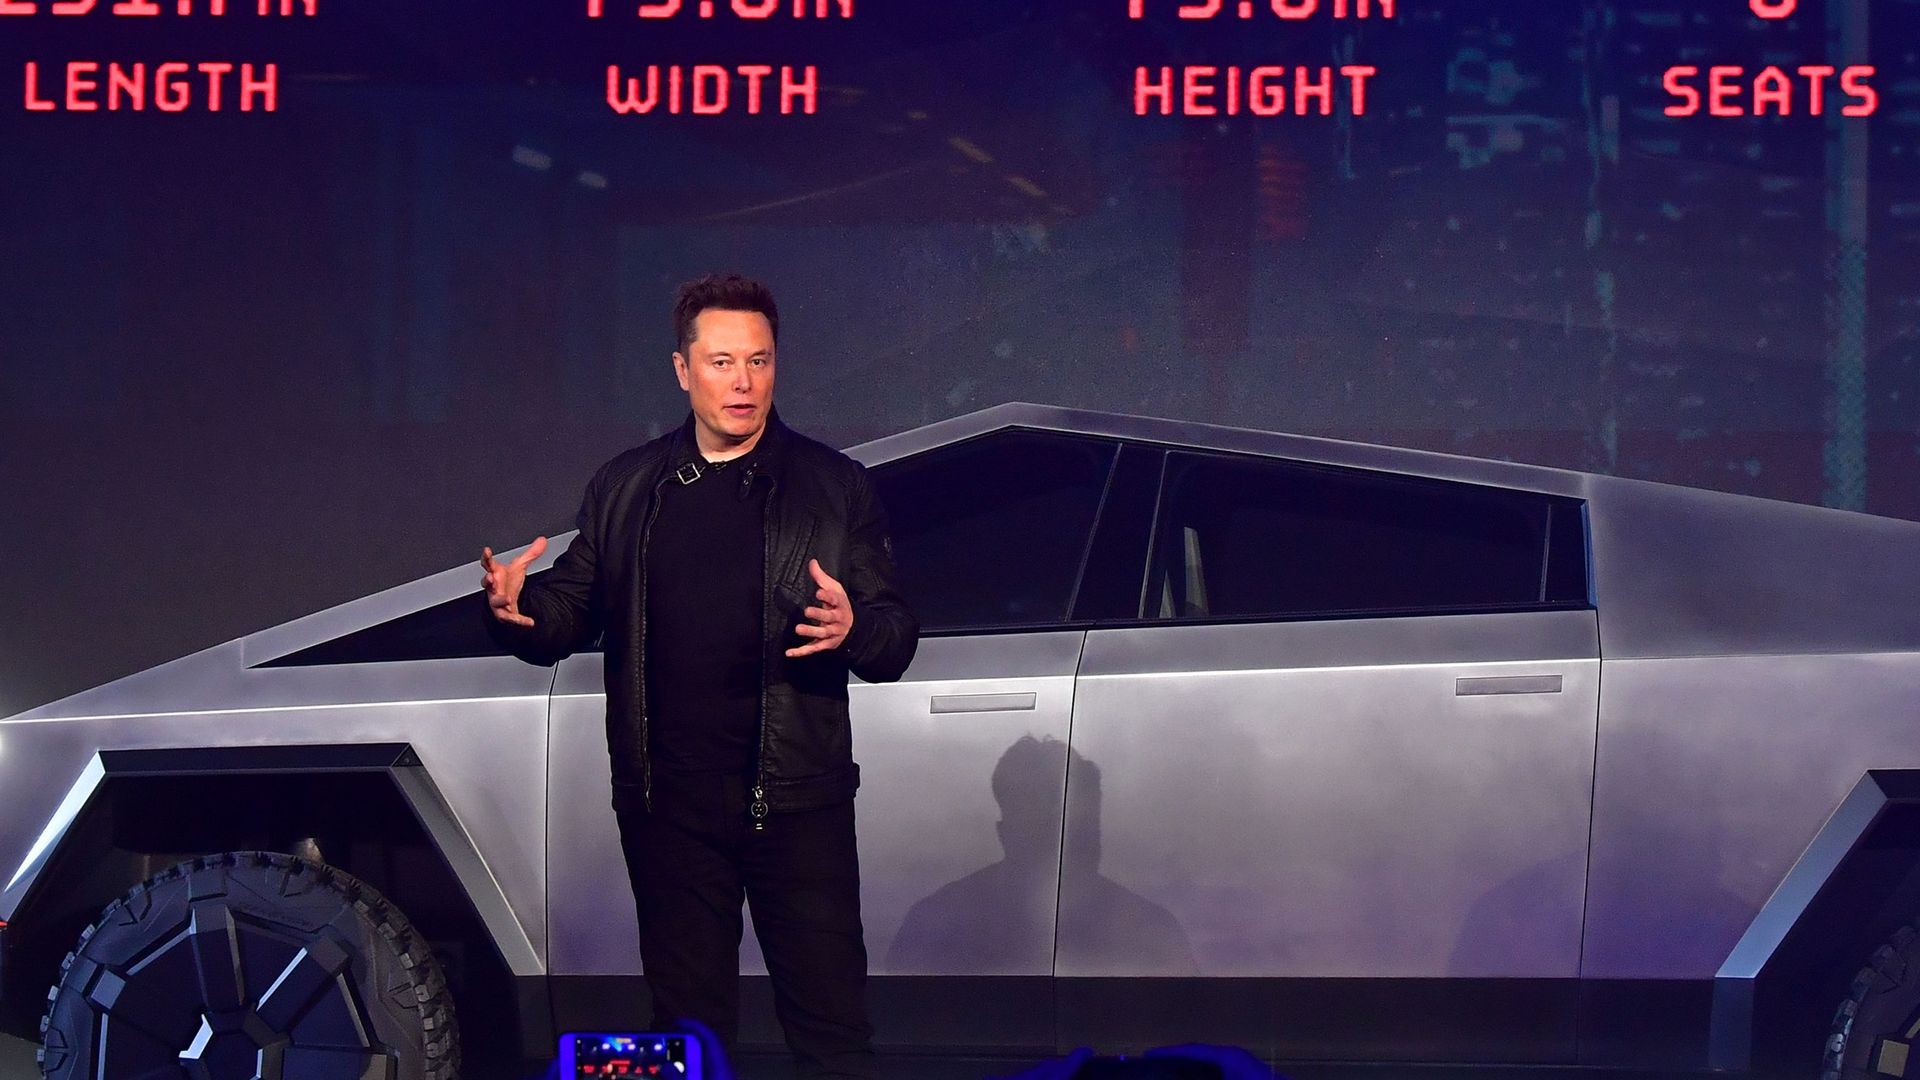 Tesla’s Cybertruck is as reckless and aggressive as the people who drive it. That suits Elon Musk and Tesla just fine.